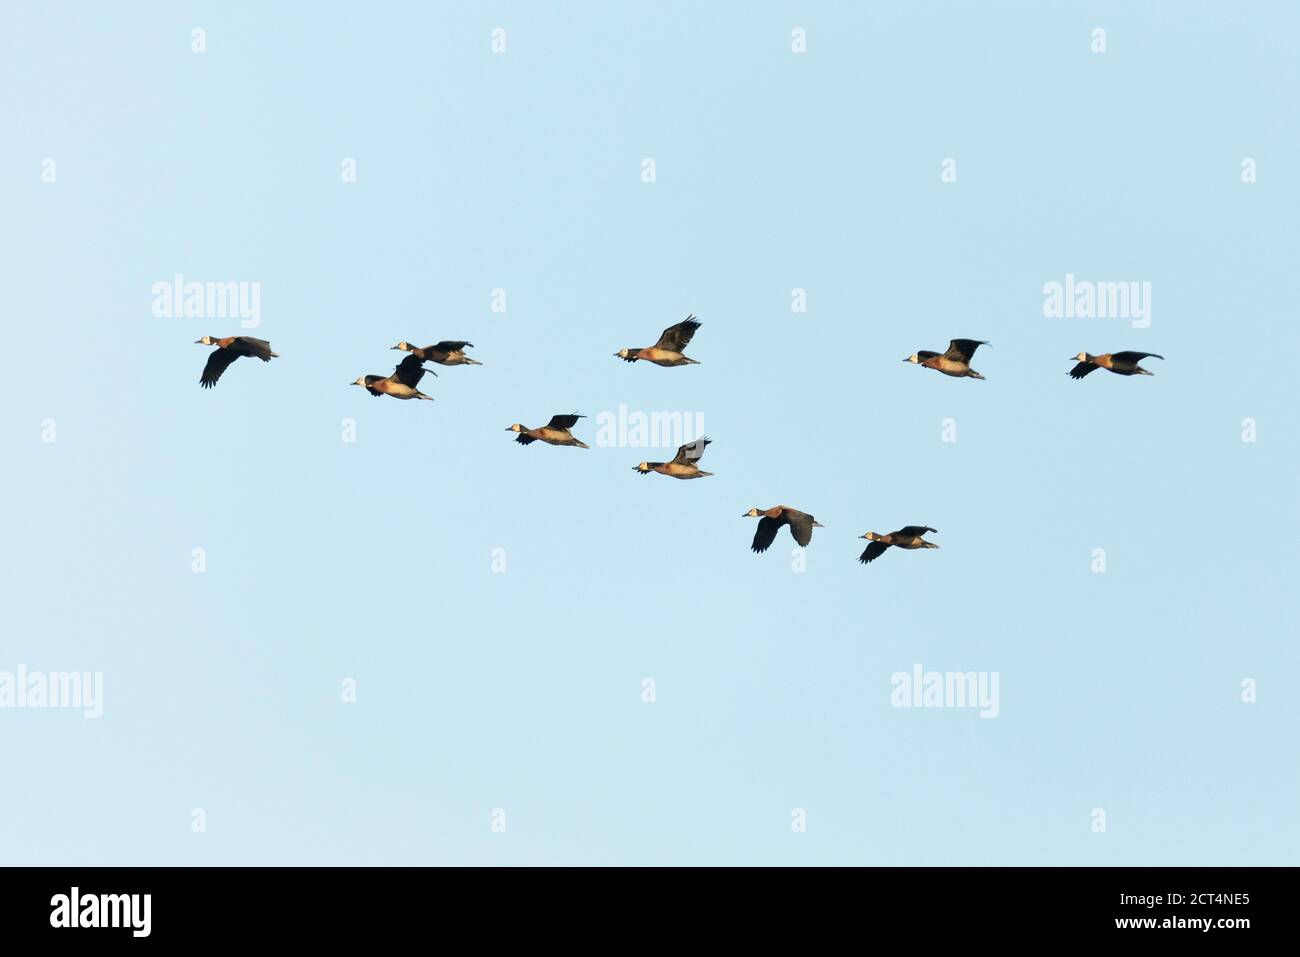 Geese flying in formation in a blue sky. Stock Photo